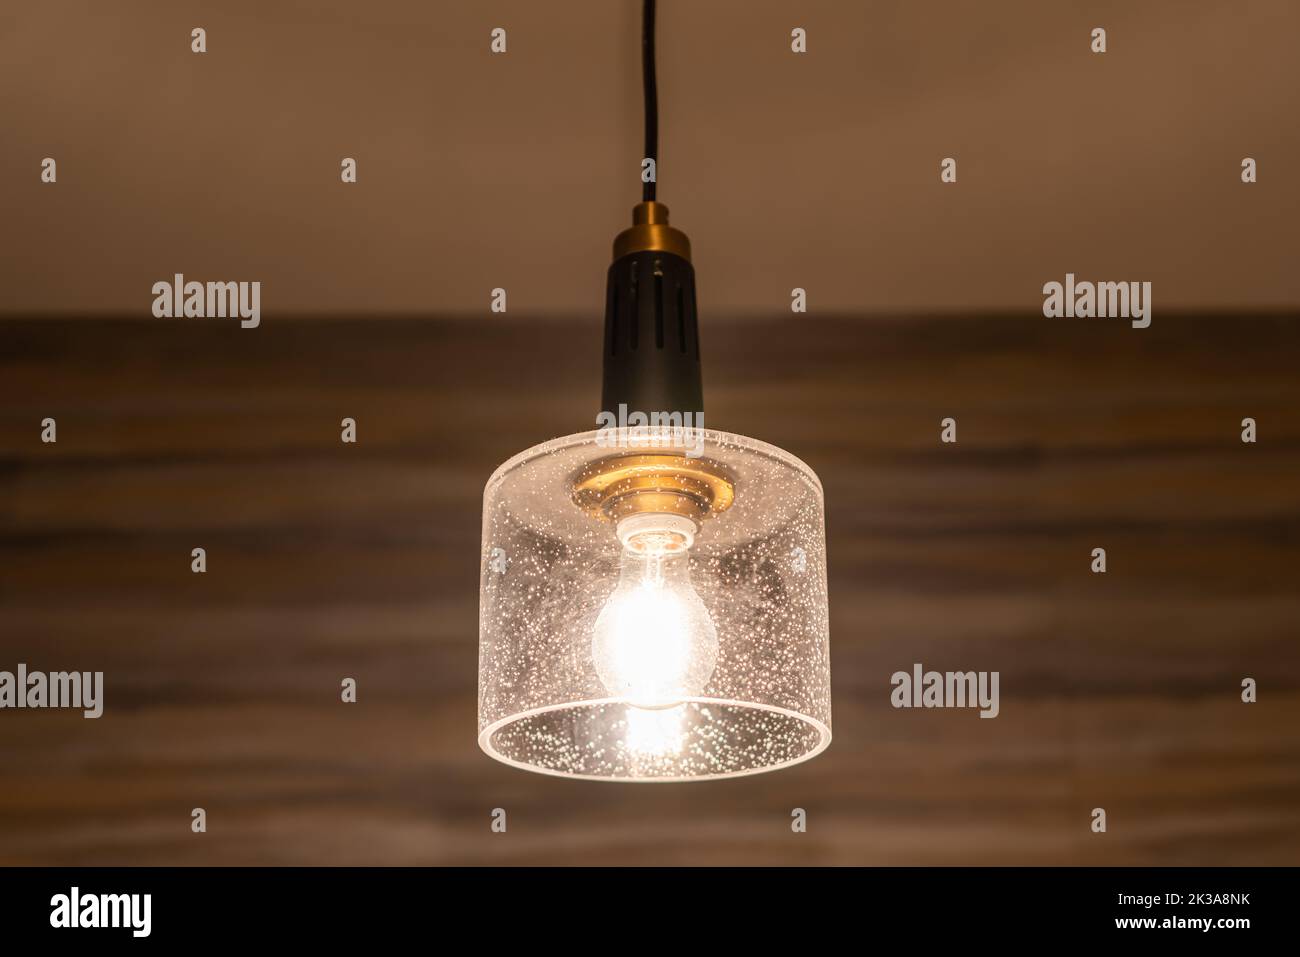 Hanging incandescent light bulb with tungsten filaments with a wall background. Stock Photo